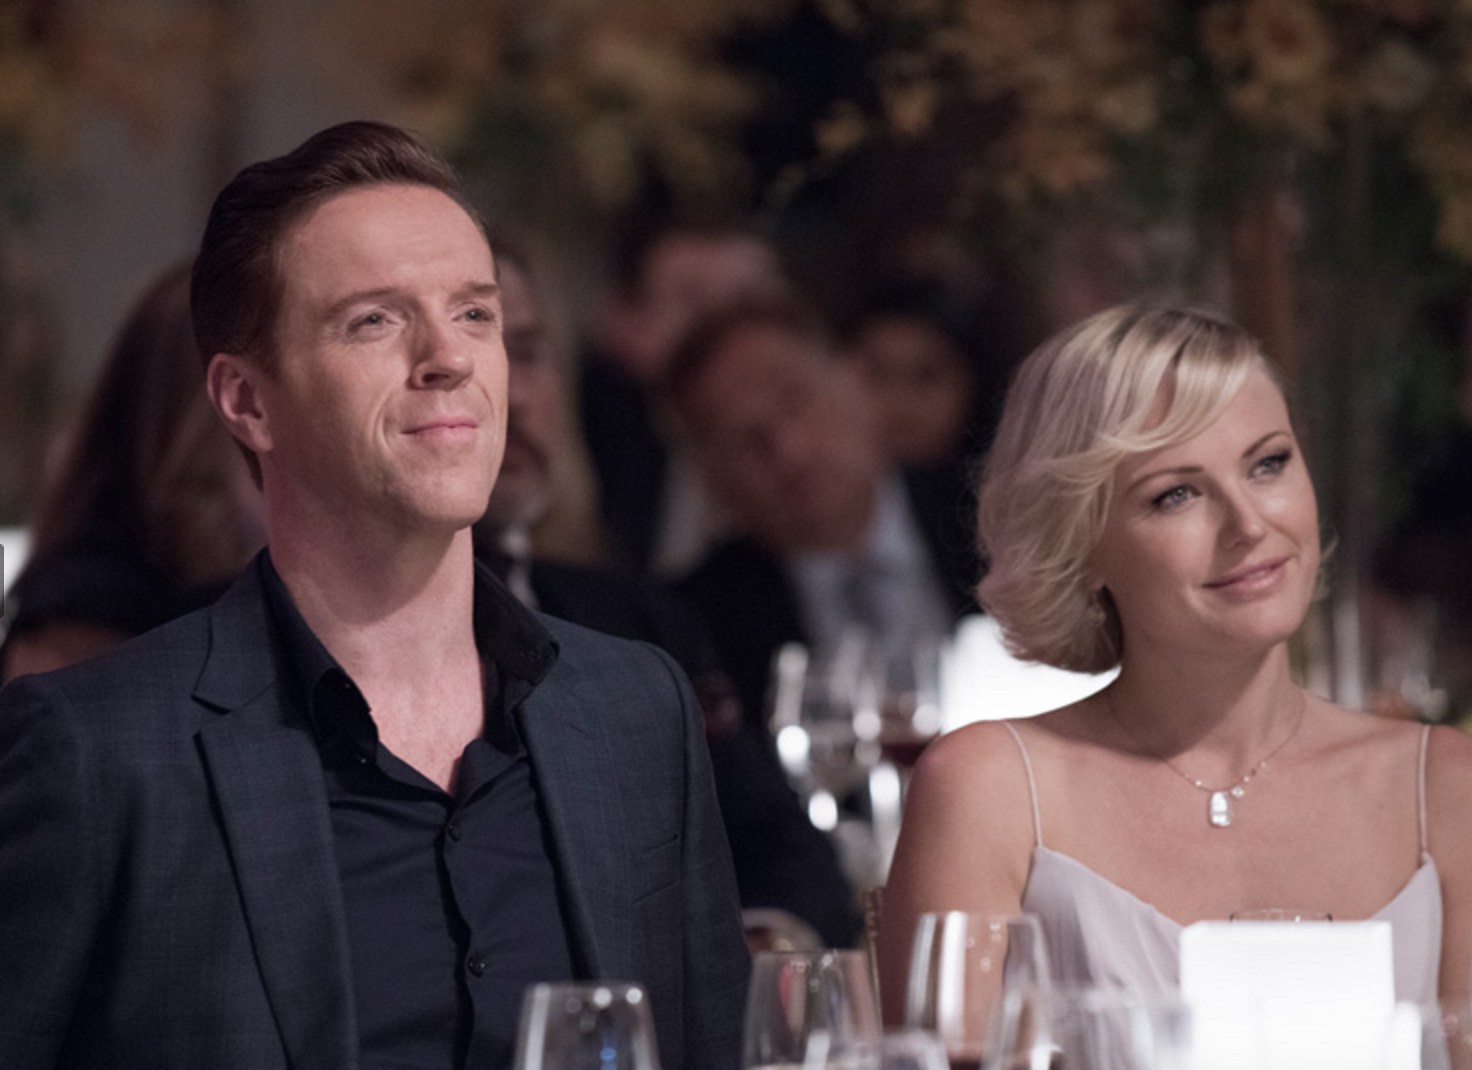 Damian Lewis plays hedge fund manager Bobby Axelrod in the new Wall Street drama 'Billions.' Malin Akerman plays Lara Axelrod. (Showtime)